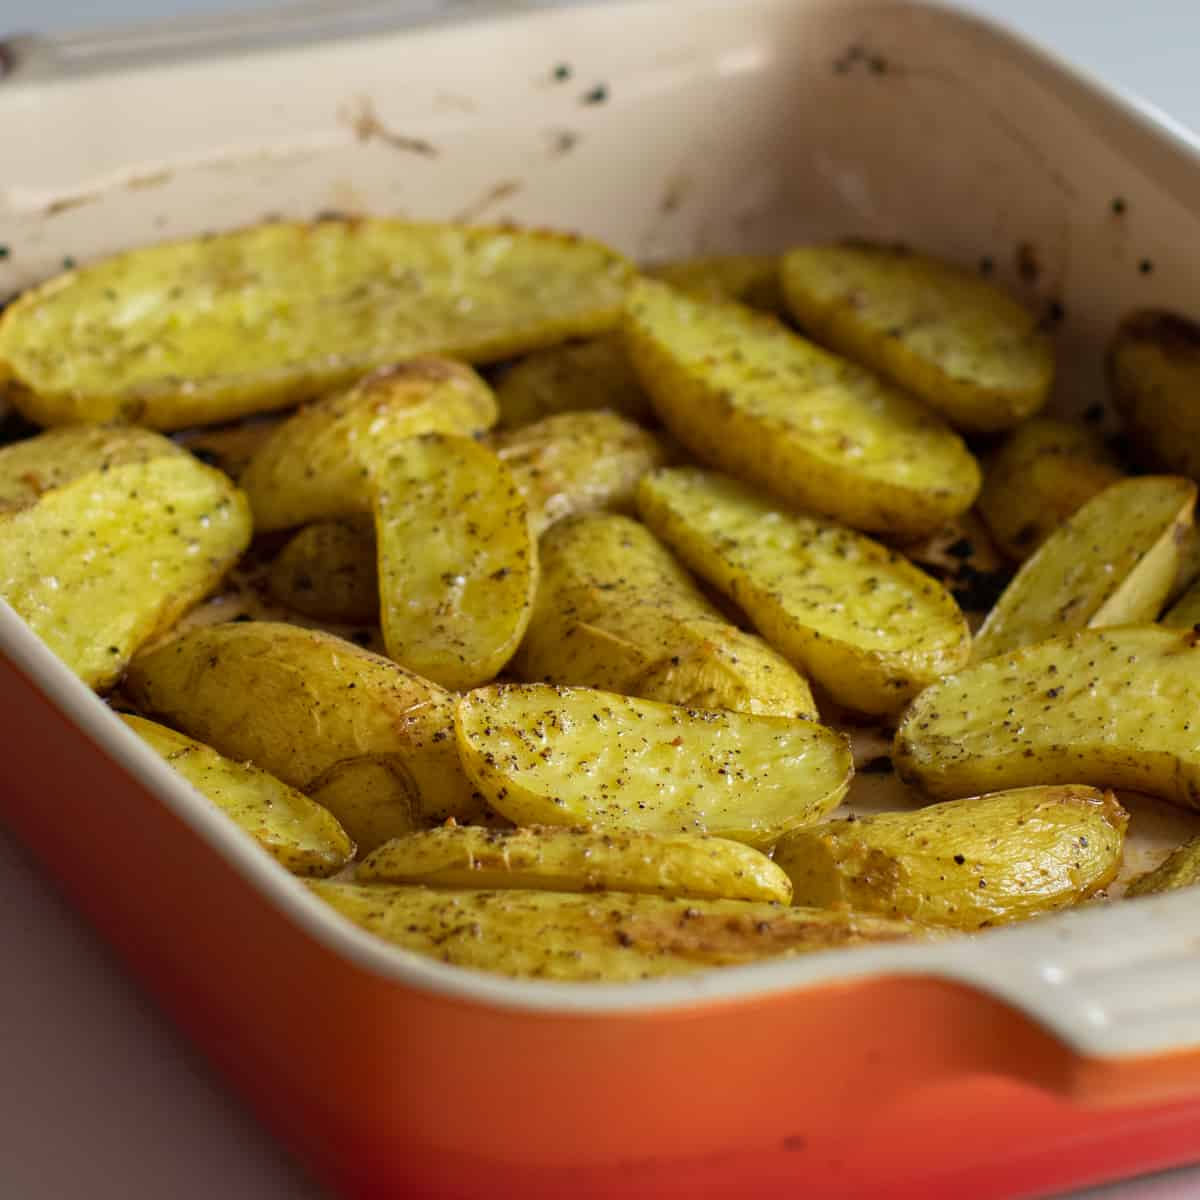 Halved fingerling potatoes cooked in a baking dish.